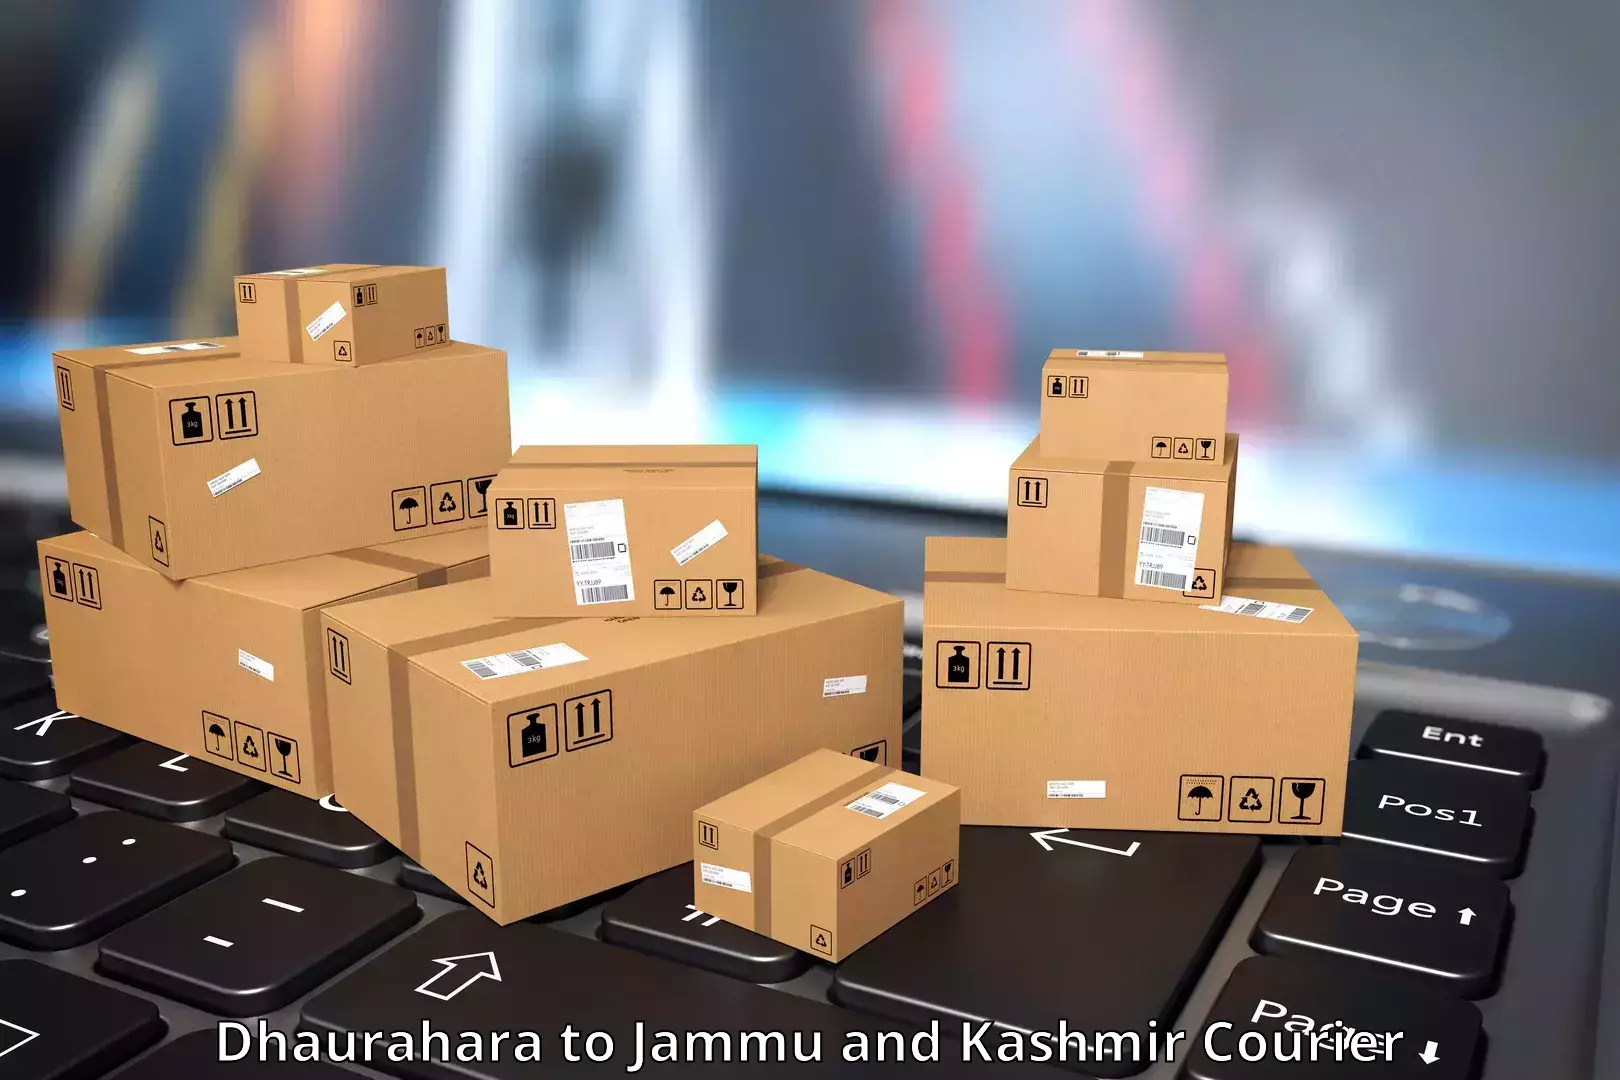 Reliable courier service Dhaurahara to Jammu and Kashmir